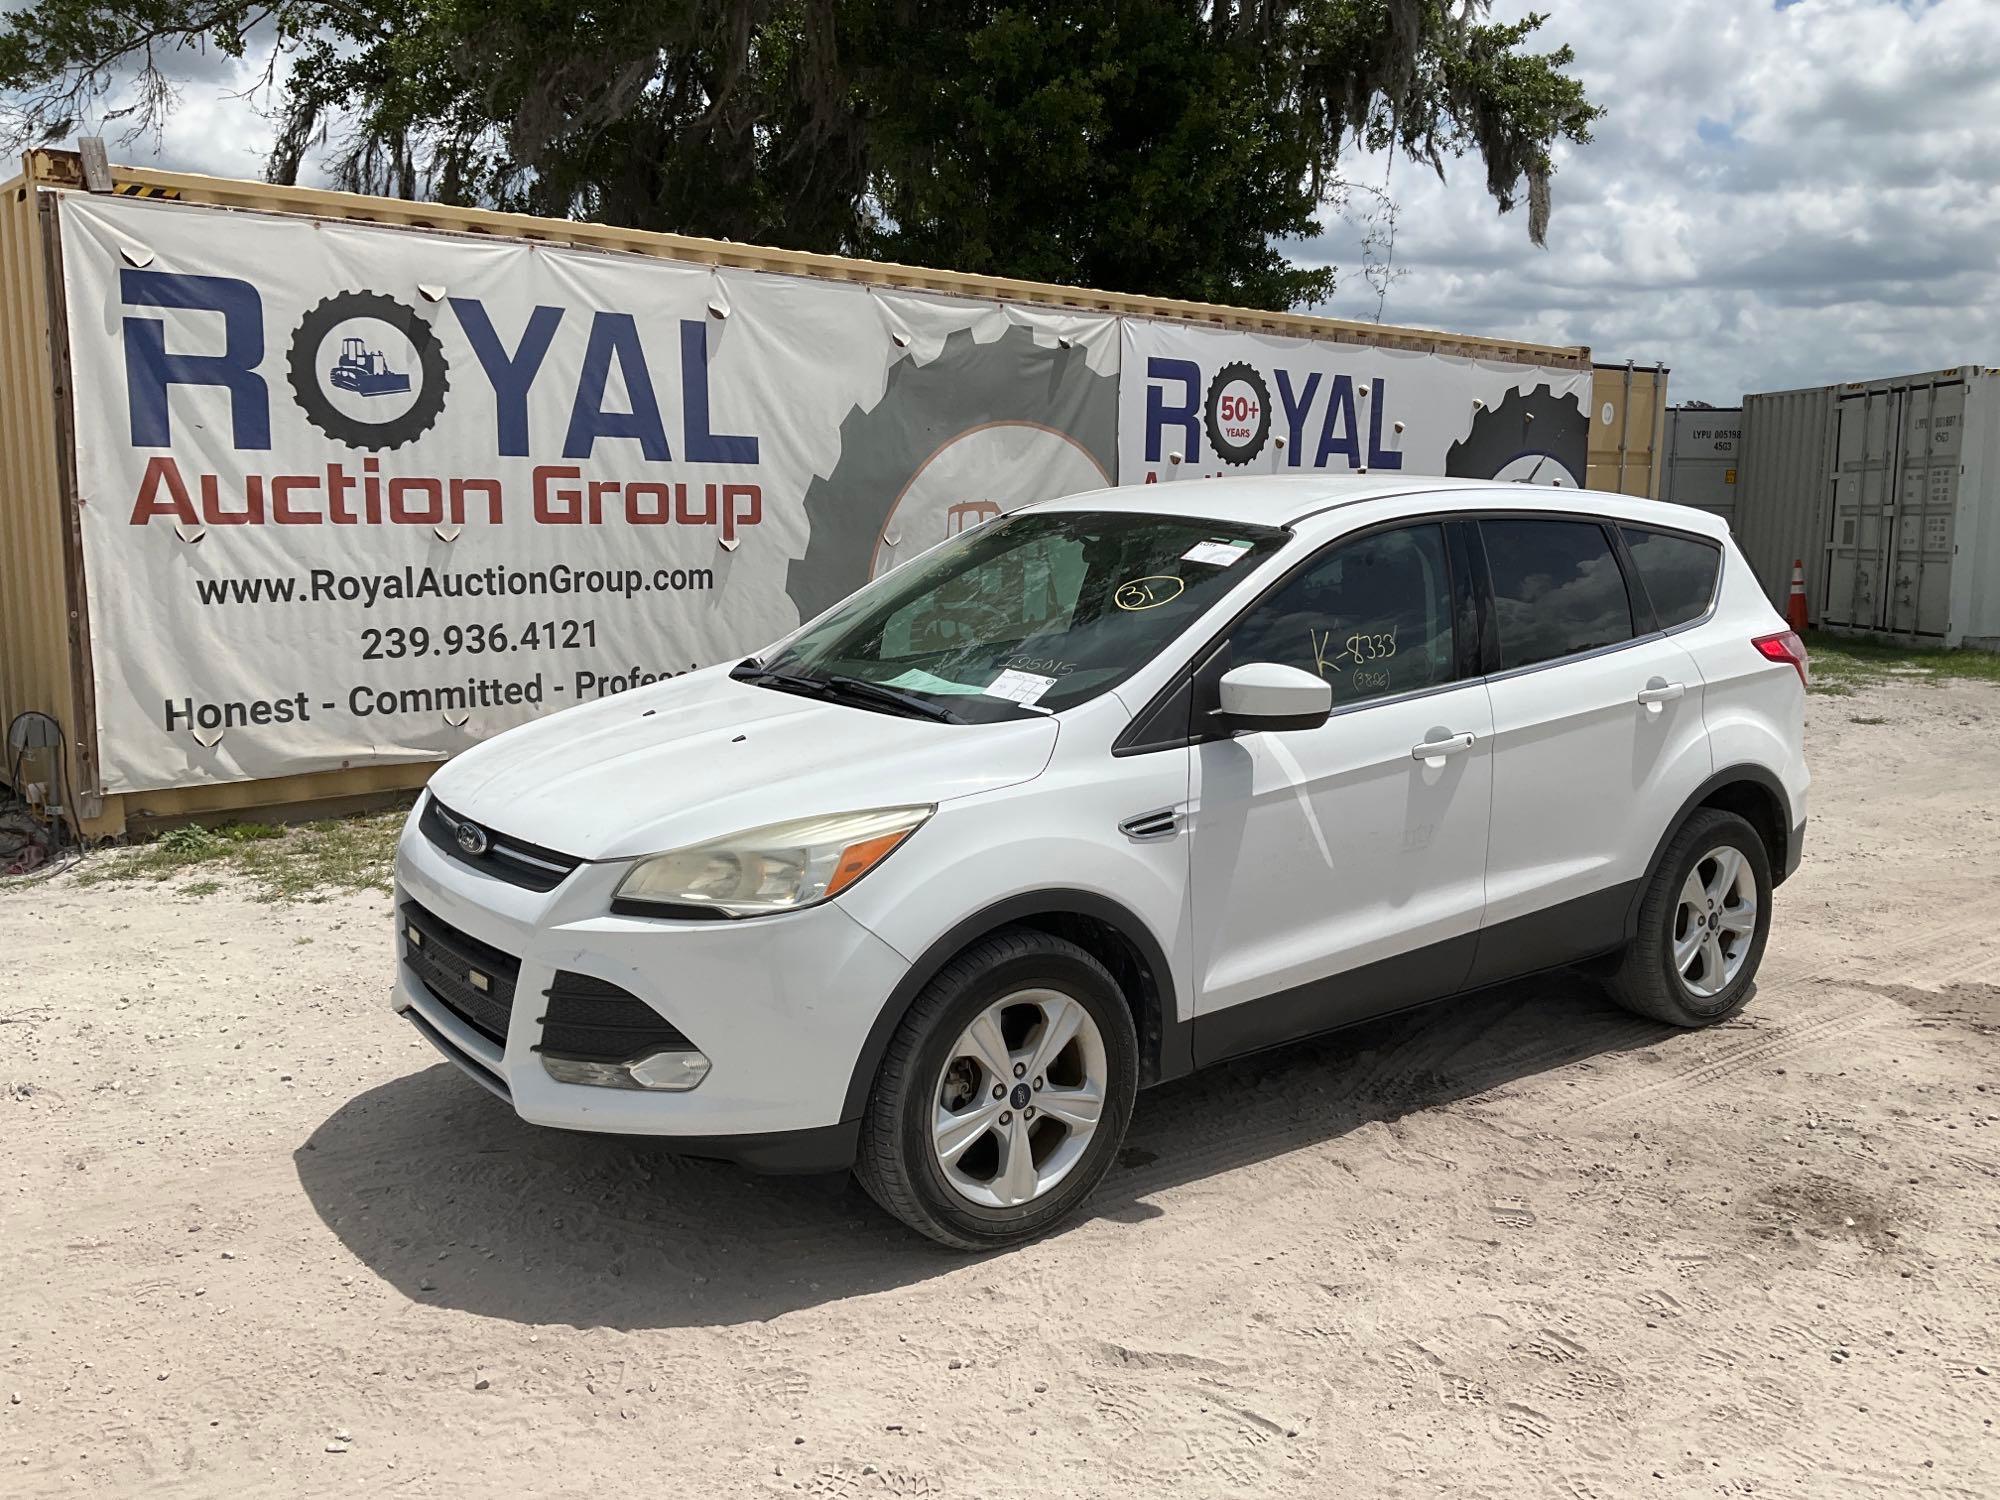 2014 Ford Escape Sport Utility Vehicle